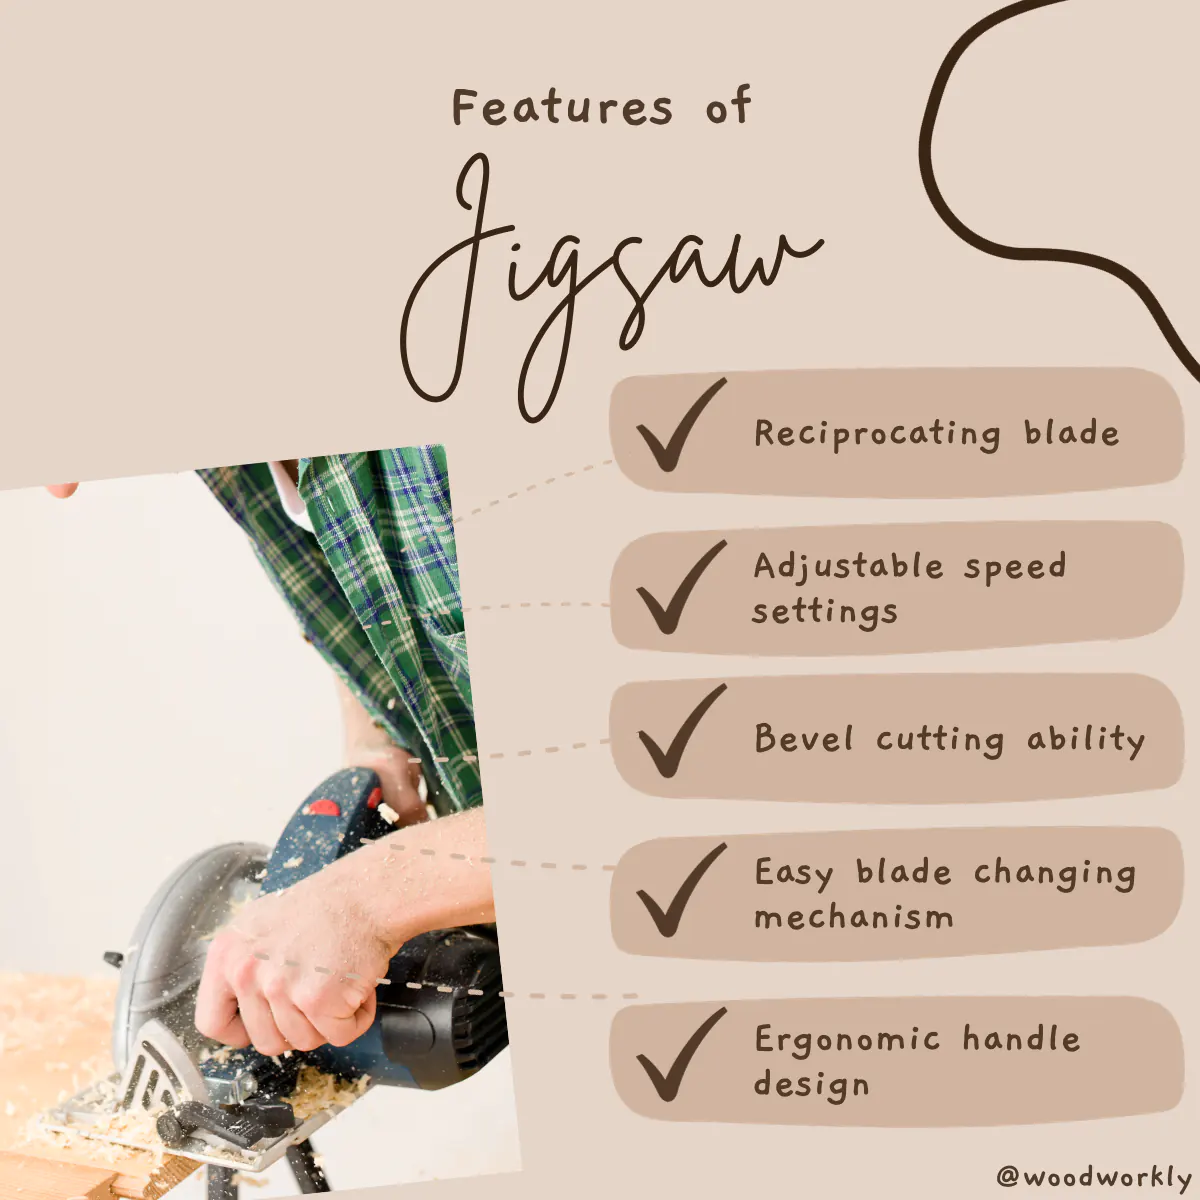 Features of Jigsaw